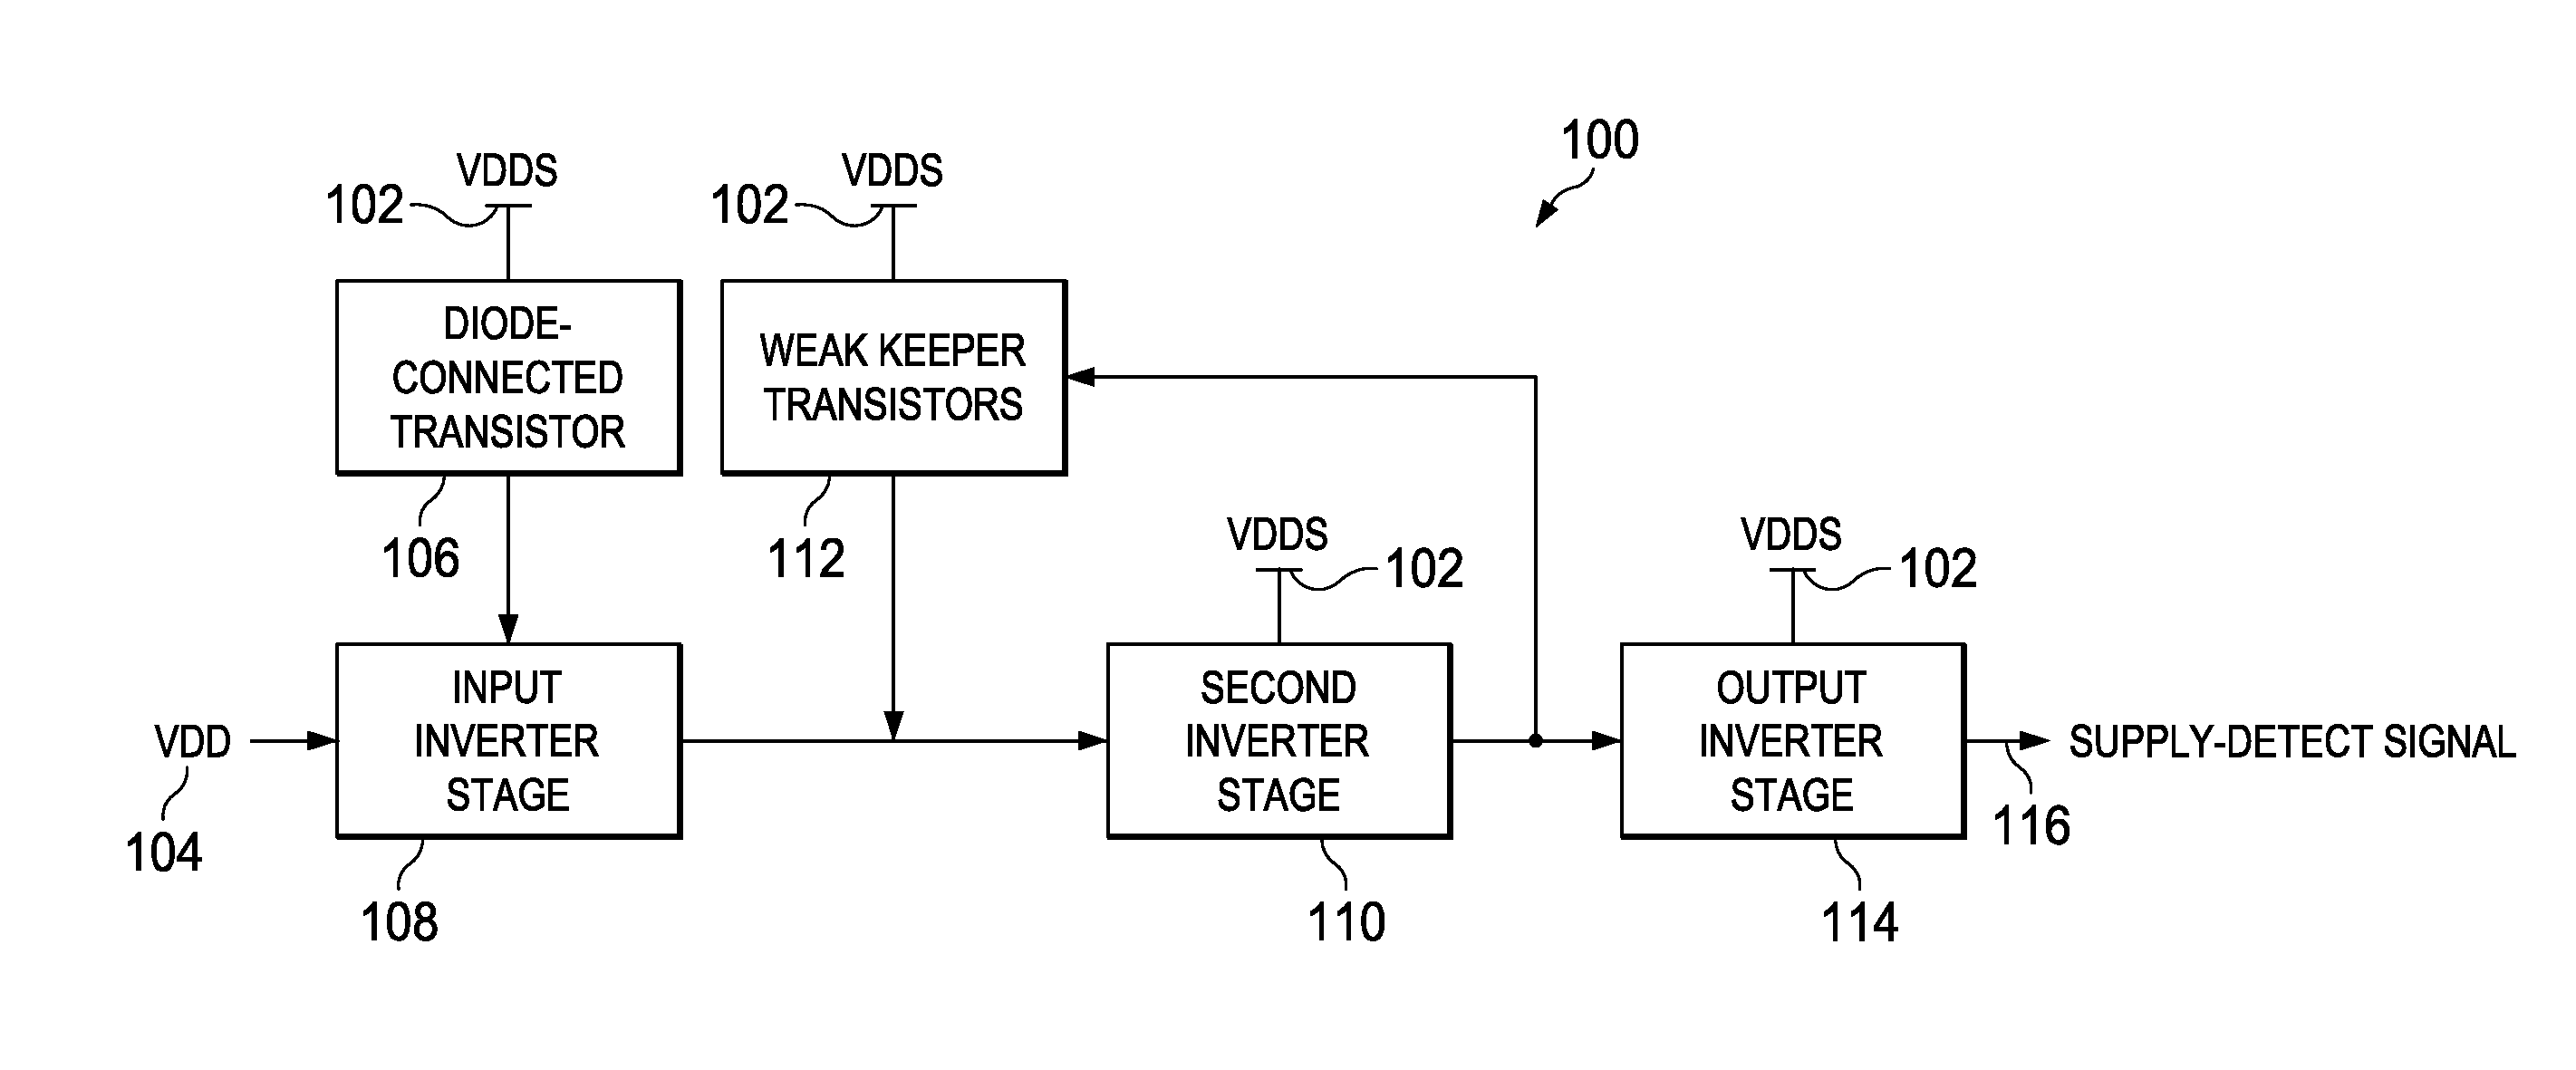 Method to achieve true fail safe compliance and ultra low pin current during power-up sequencing for mobile interfaces